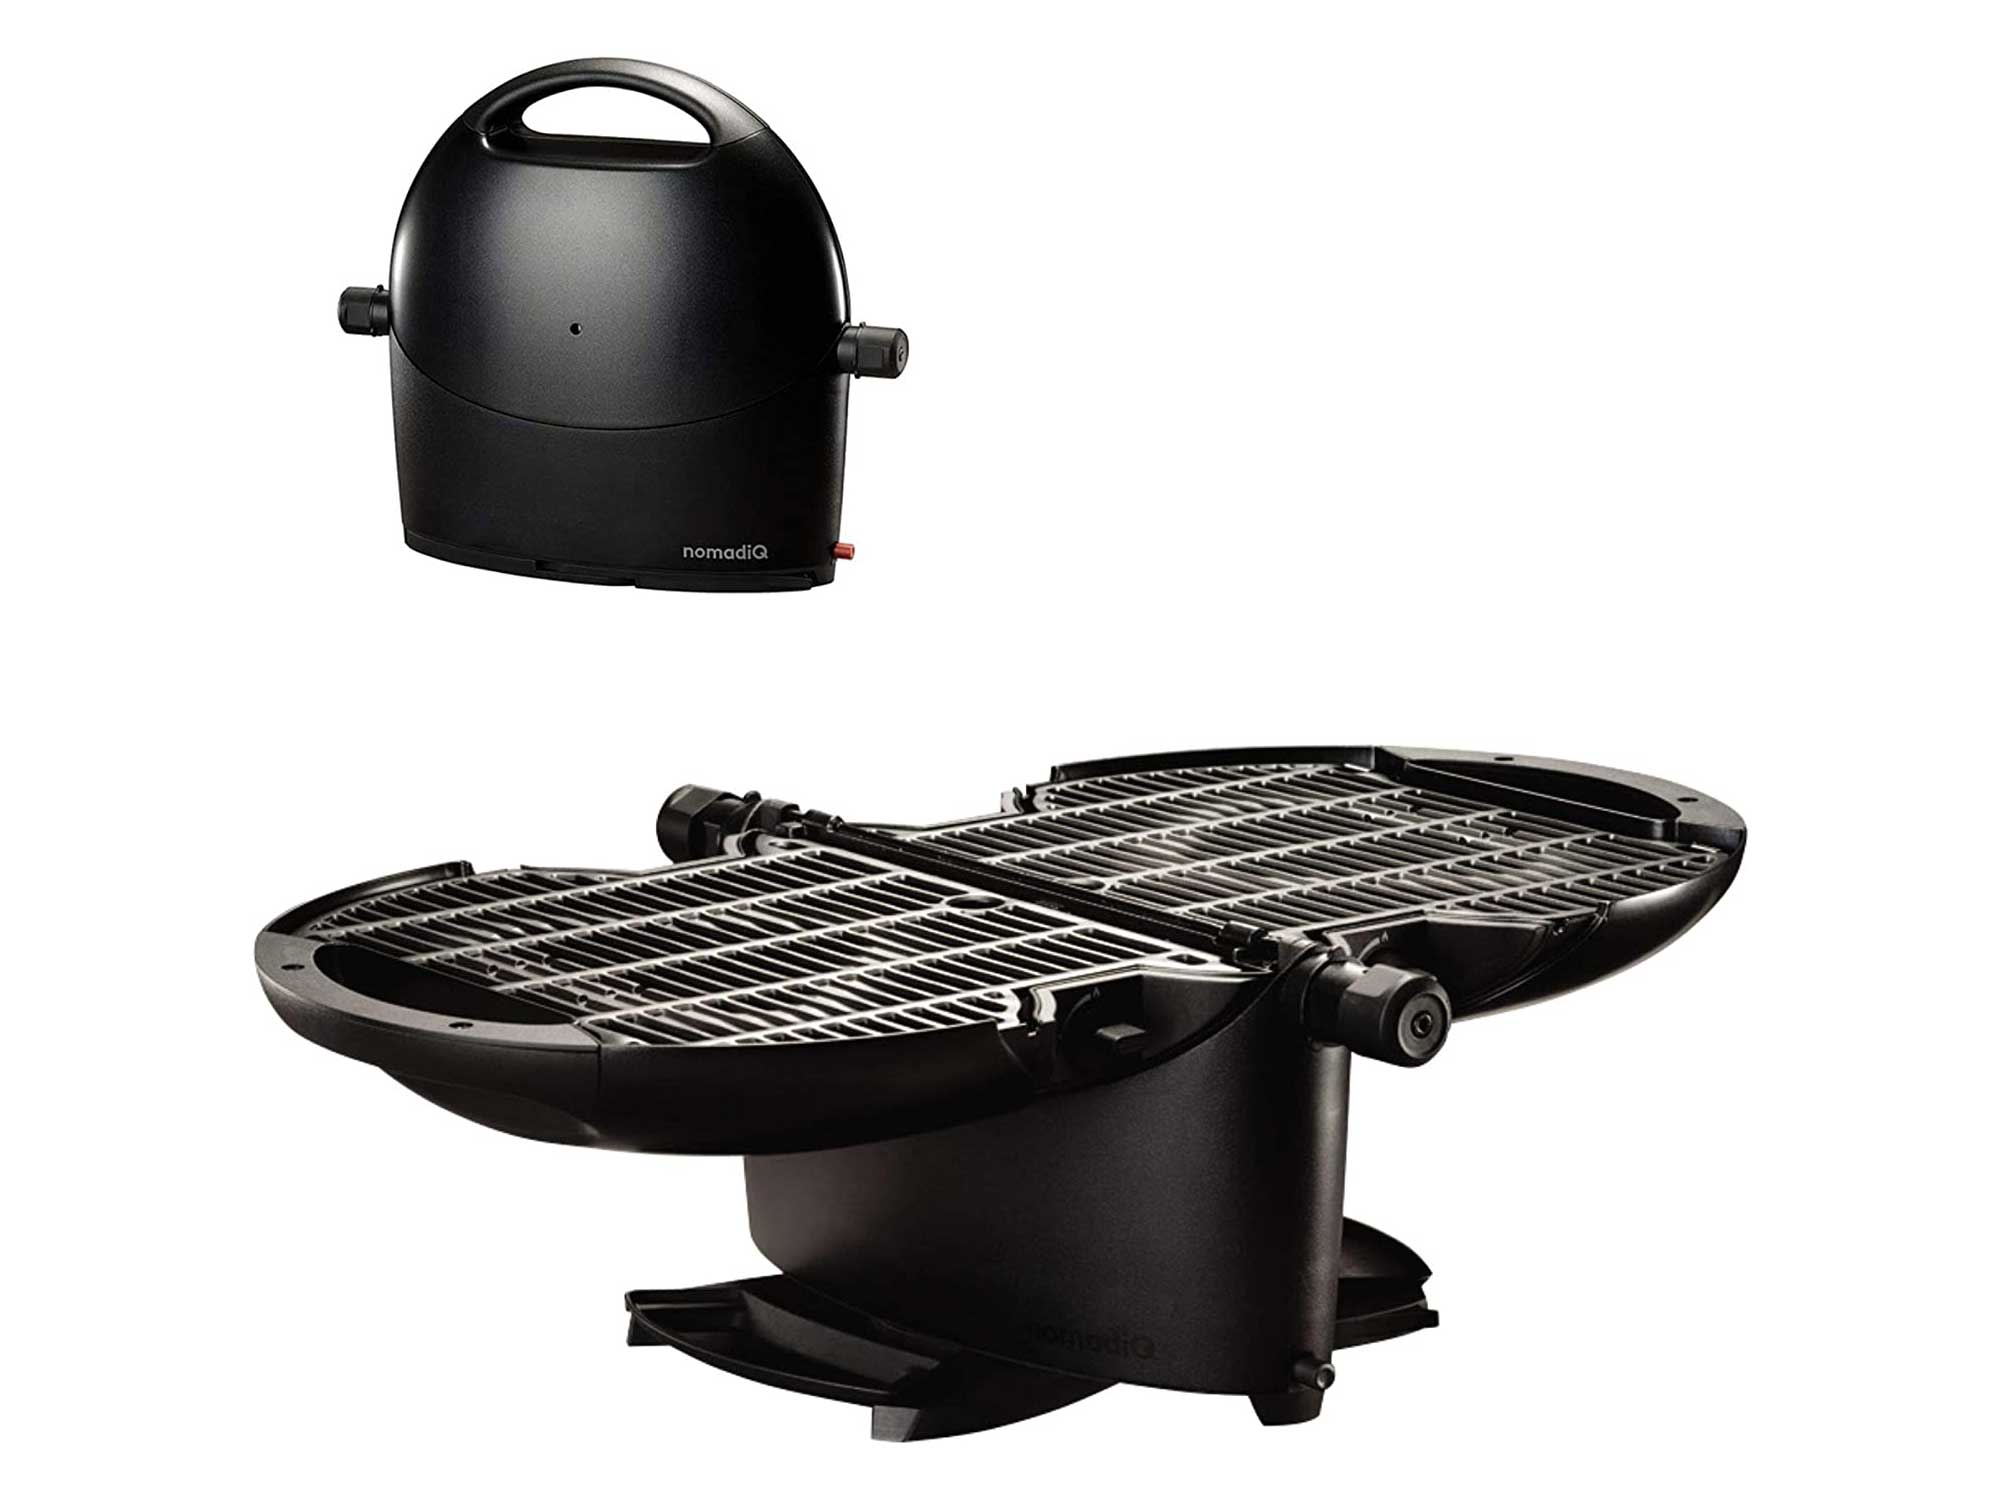 The NomadiQ makes grilling on the go easy